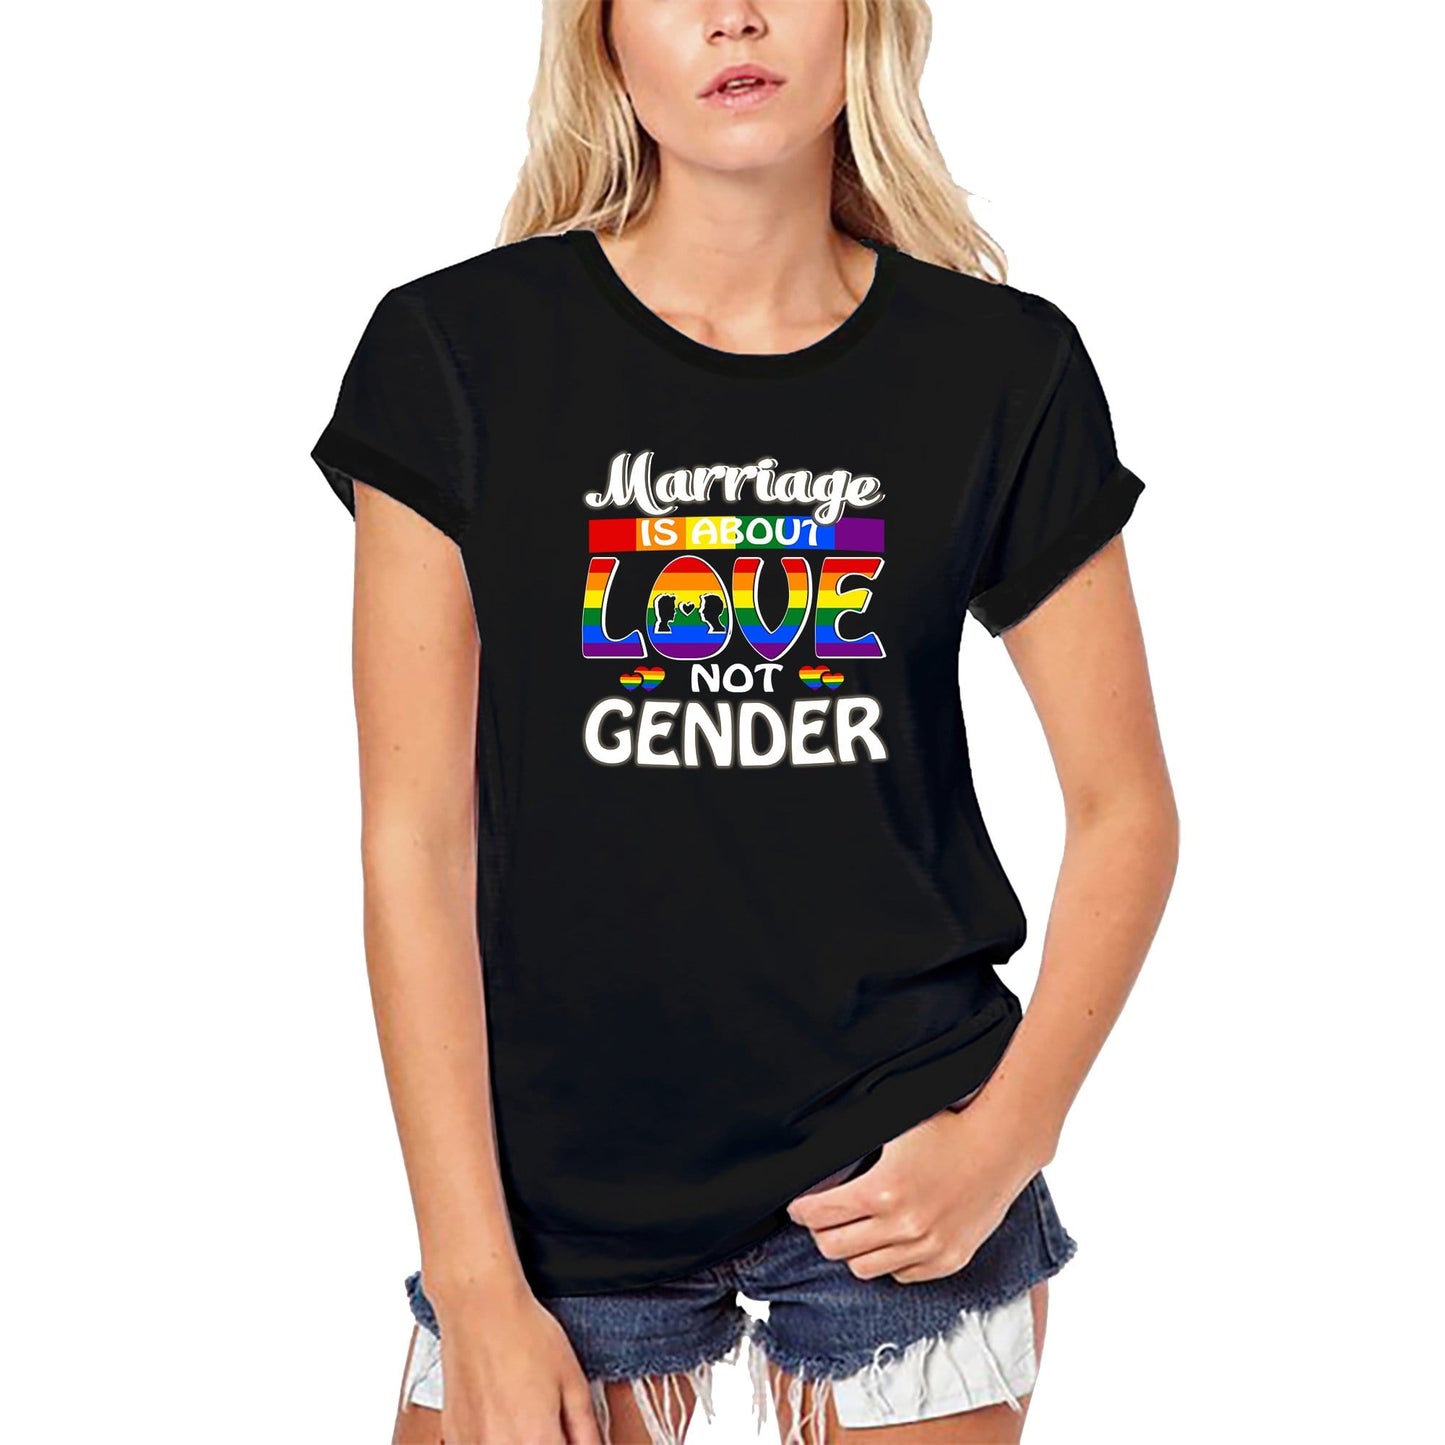 ULTRABASIC Women's Organic T-Shirt Marriage Is About Love Not Gender - Vintage LGBT Flag Tee Shirt